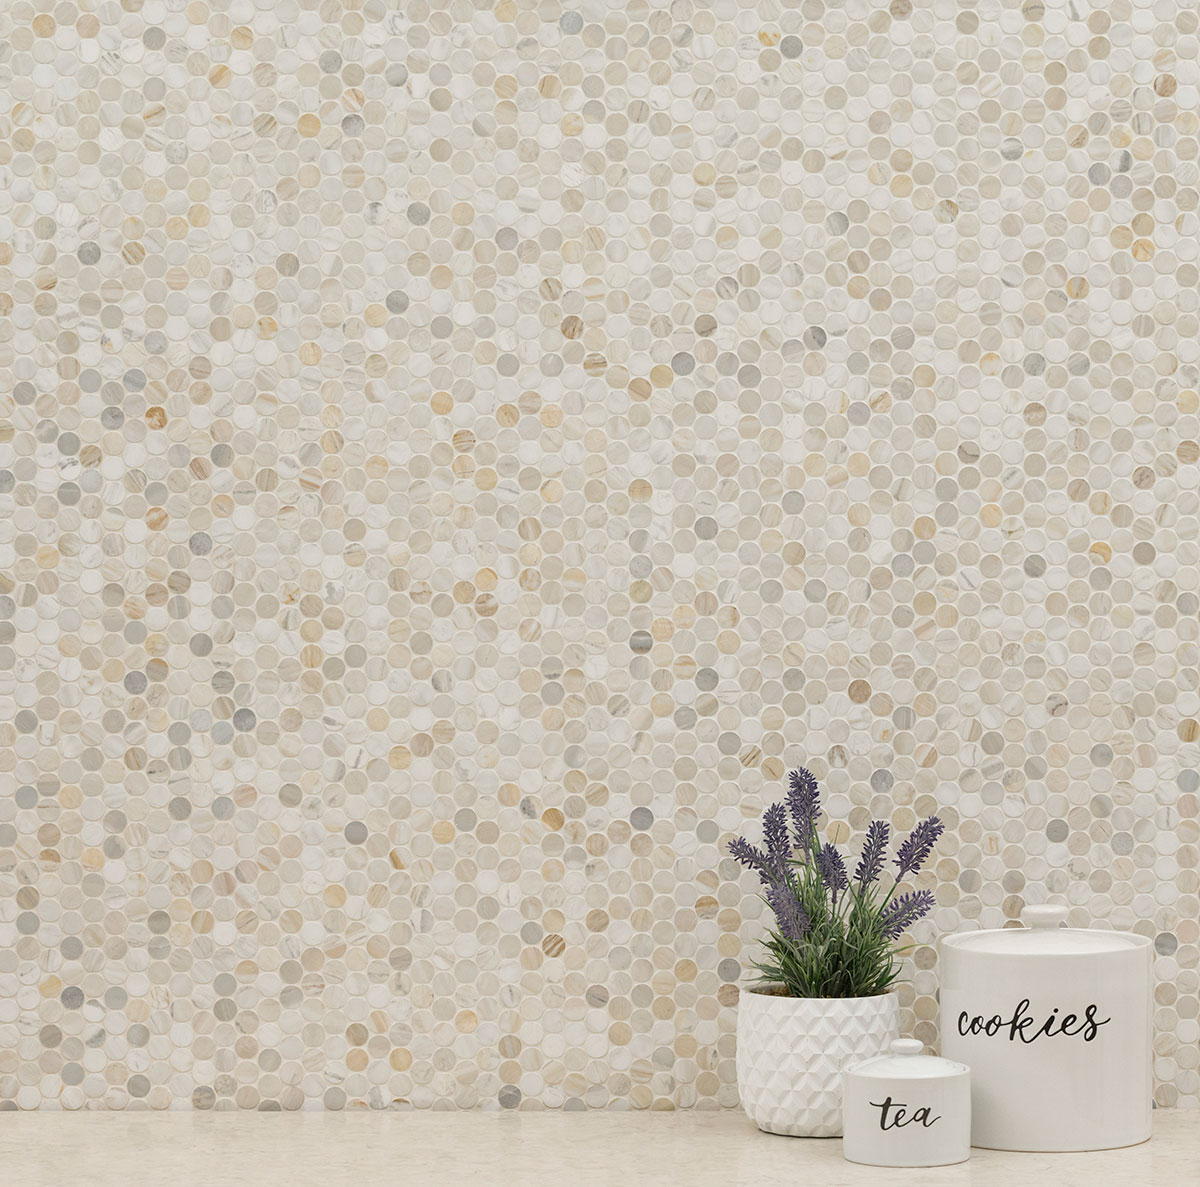 Athena Gold Pennyround Tile wall in kitchen